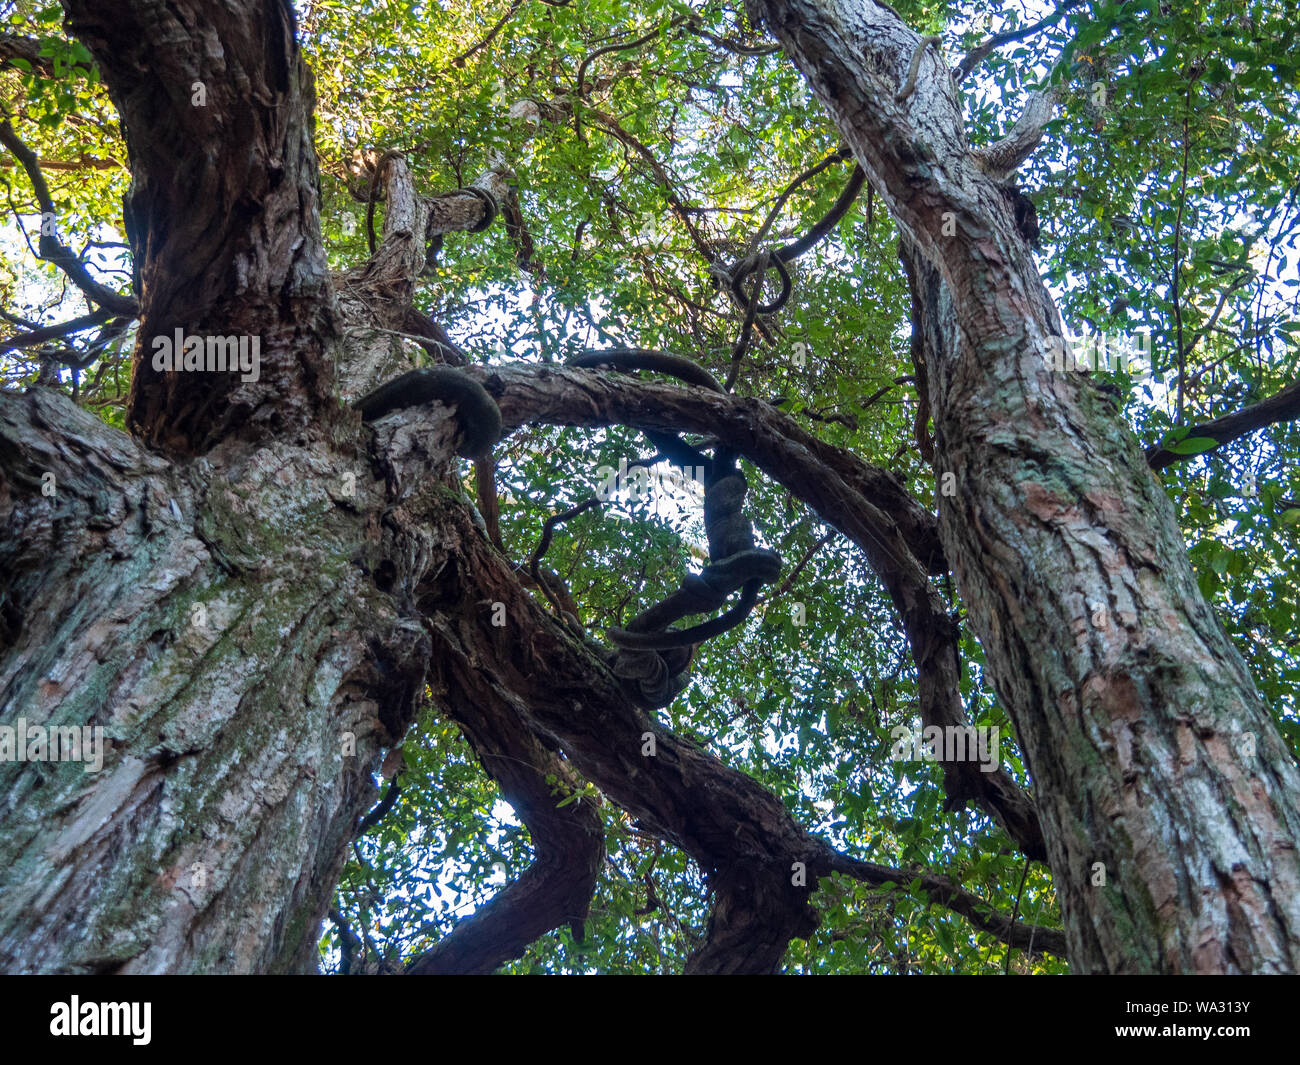 Looking up through the knotted gnarly branches of very tall trees to the canopy of green leaves and sky above, Australia, Winter Stock Photo